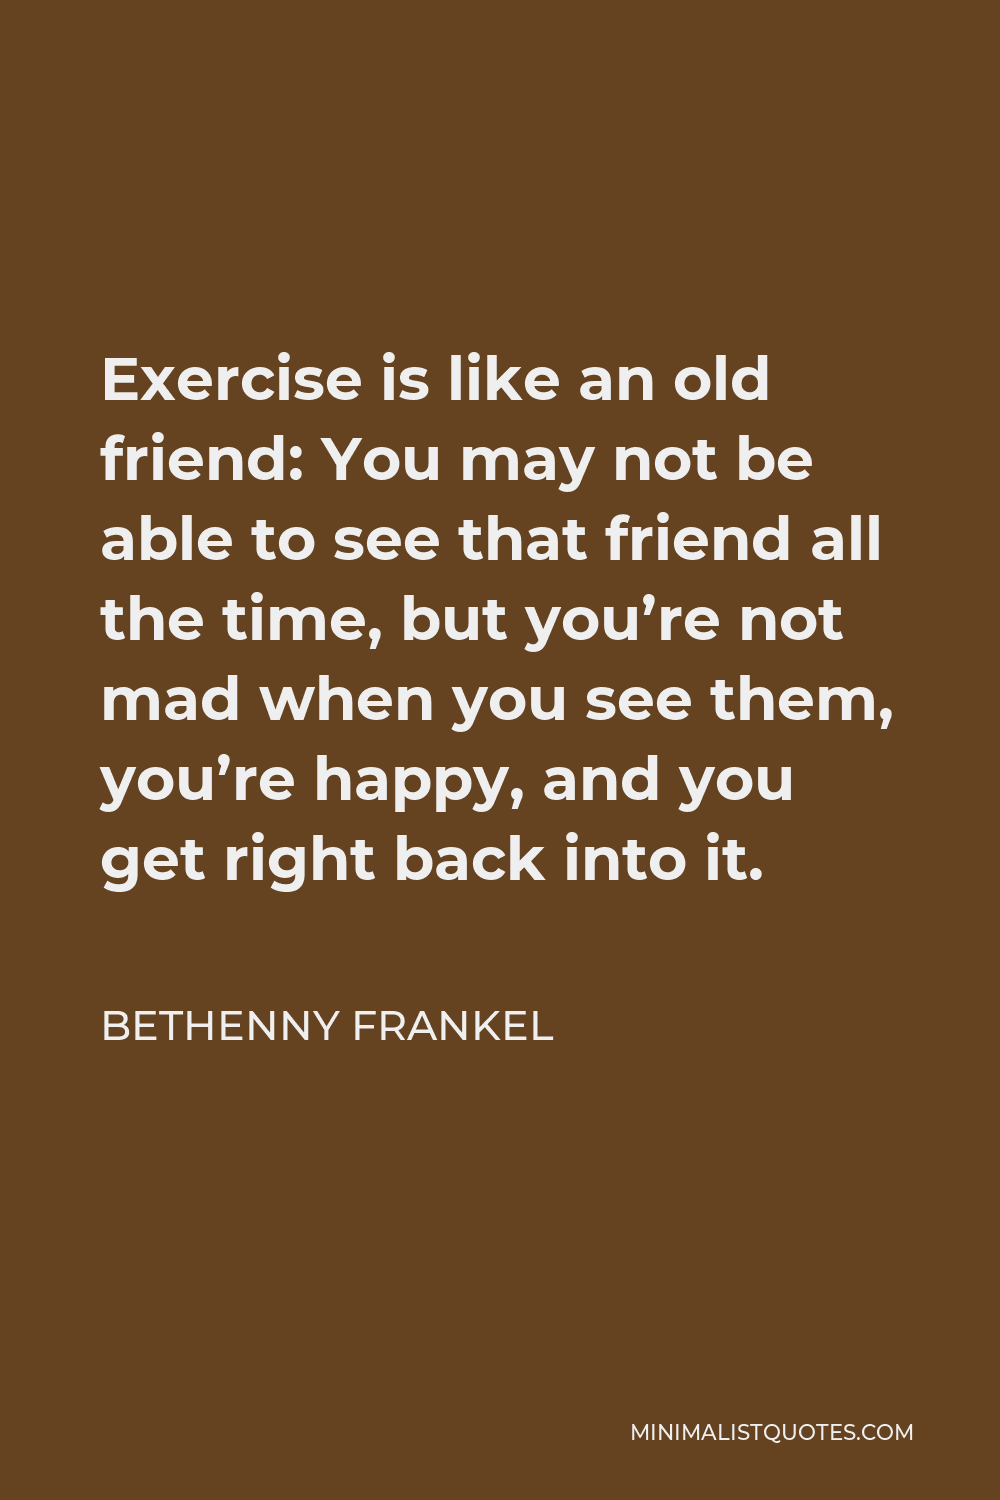 Bethenny Frankel Quote - Exercise is like an old friend: You may not be able to see that friend all the time, but you’re not mad when you see them, you’re happy, and you get right back into it.